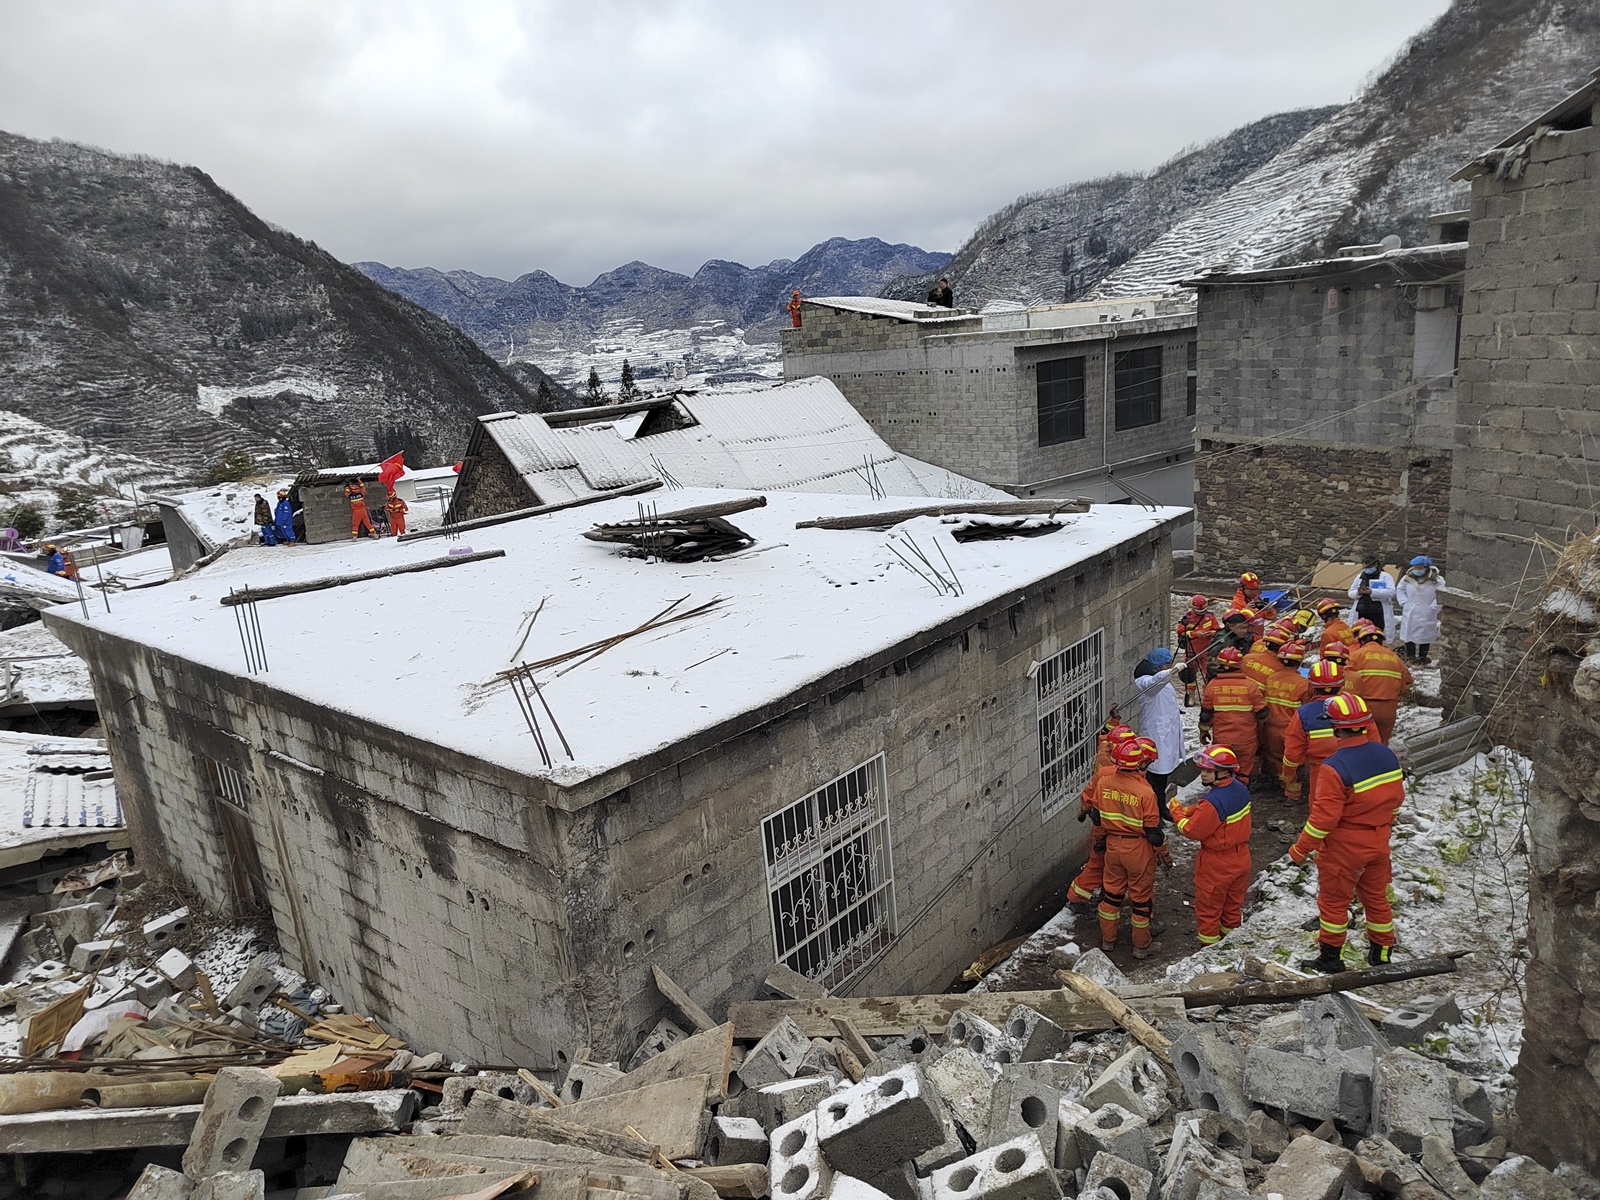 epa11096644 Rescuers workers in action at the site of a landslide in Liangshui Village, Tangfang Town in the city of Zhaotong, southwest China's Yunnan Province, 22 January 2024. Two people, previously reported missing, have been found and confirmed dead after a landslide struck southwest China's Yunnan Province, local authorities said. The landslide hit Liangshui Village in the city of Zhaotong at around 6 a.m. on 22 January, leading to at least 47 people missing, according to local headquarters for the disaster relief.
More than 200 rescuers, together with 33 firefighting vehicles and 10 loading machines, are combing through the debris to search for the missing people. Over 200 residents have been evacuated to safer places.  EPA/XINHUA / Hu Chao CHINA OUT / UK AND IRELAND OUT  /       MANDATORY CREDIT  EDITORIAL USE ONLY  EDITORIAL USE ONLY